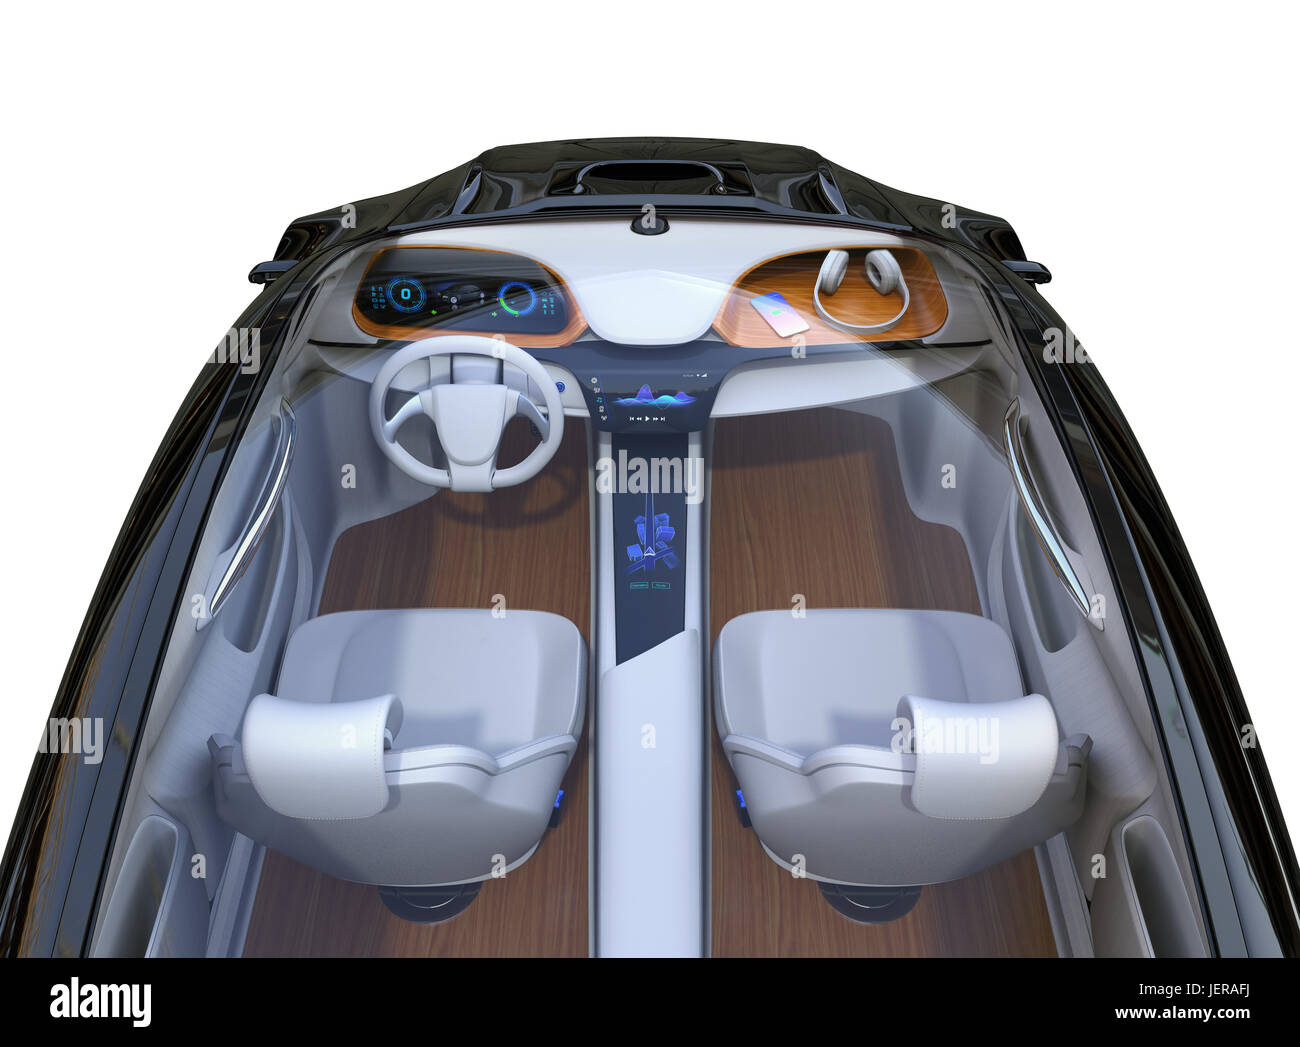 Electric car dashboard concept. Smart phone charging on the wooden tray by wireless charging unit. 3D rendering image. Stock Photo